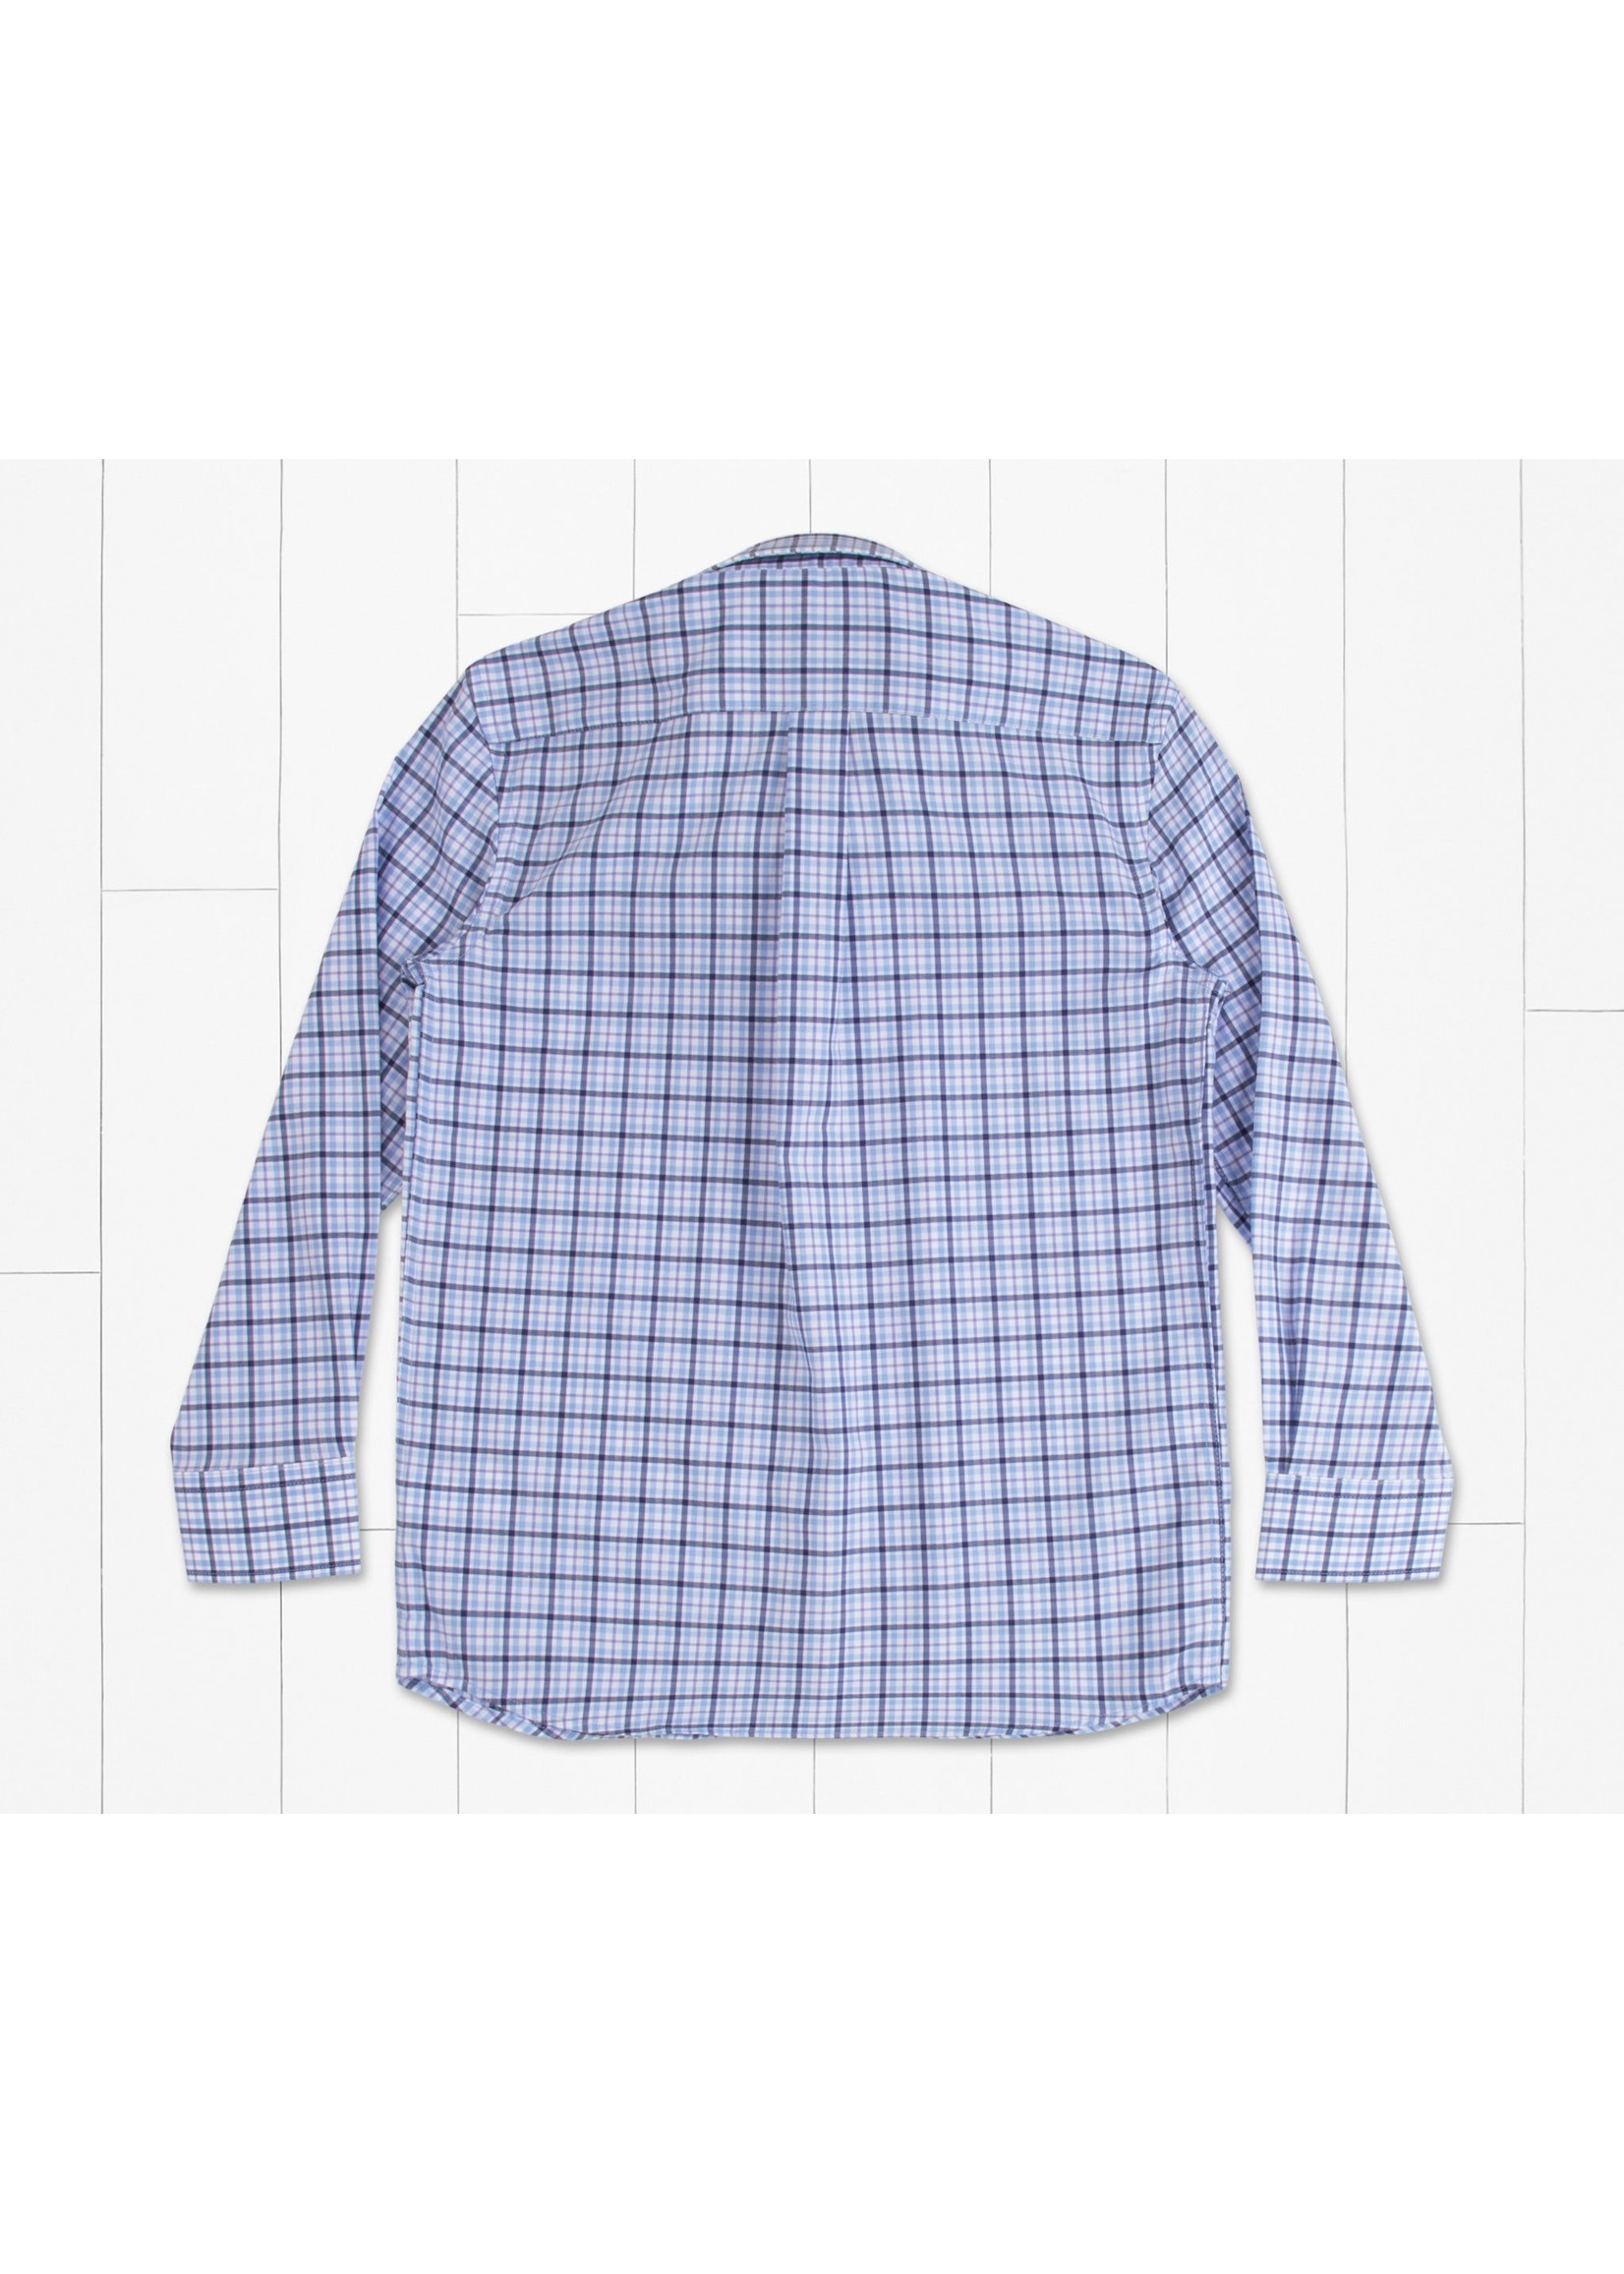 Southern Marsh Youth Gonzales Performance Dress Shirt